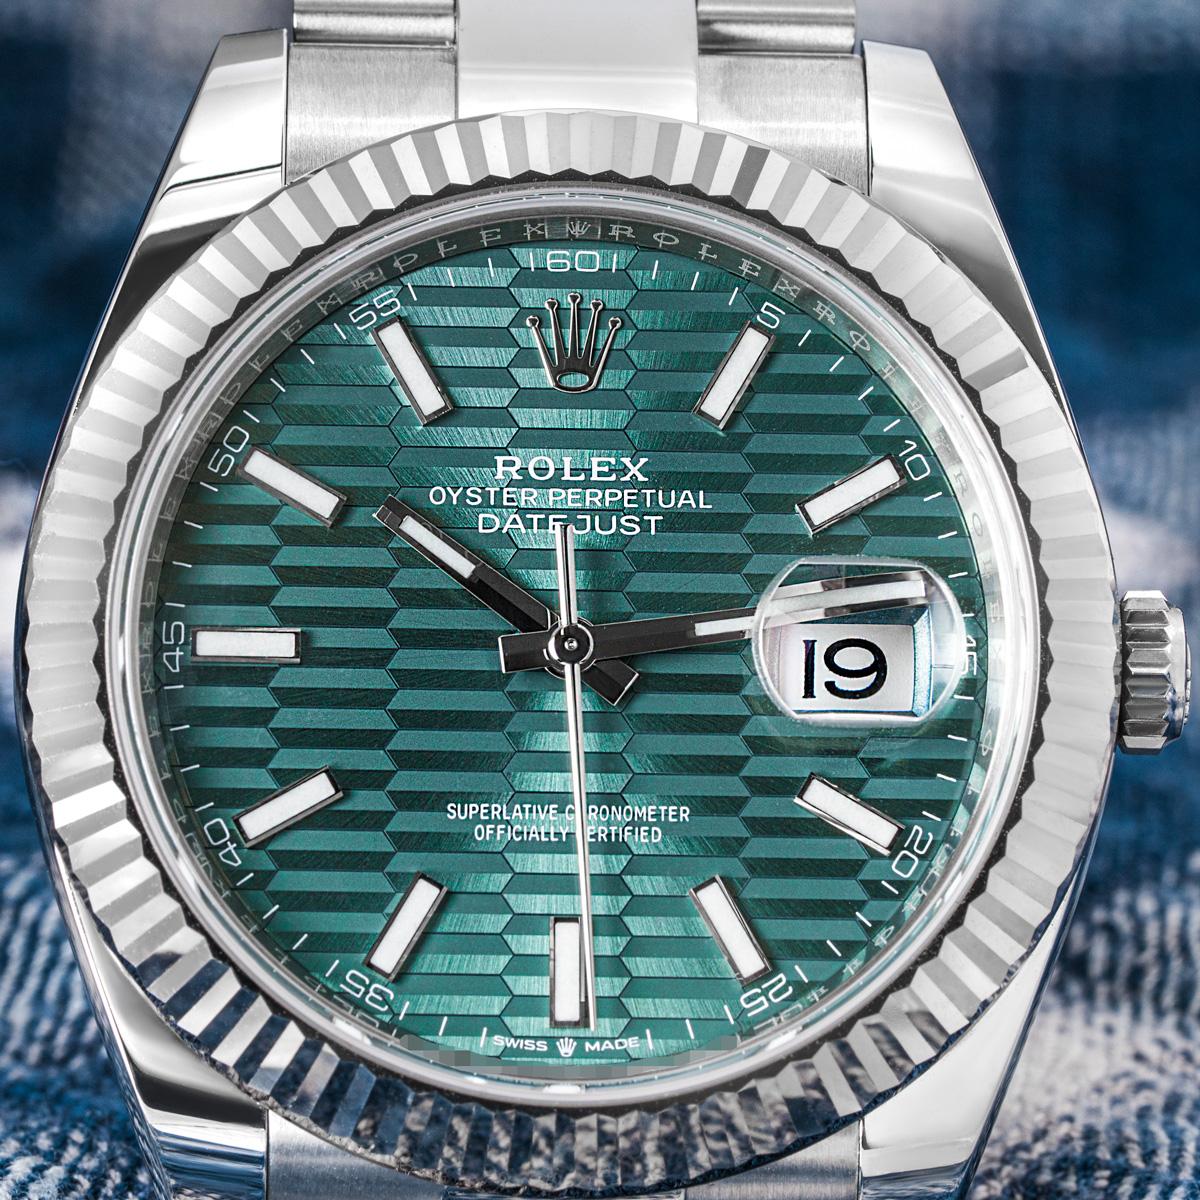 An unworn 41mm stainless steel Datejust by Rolex. Featuring a distinctive mint green fluted motif dial with applied hour markers and a white gold fluted bezel. Fitted with a sapphire glass, a self-winding automatic movement and an Oyster bracelet